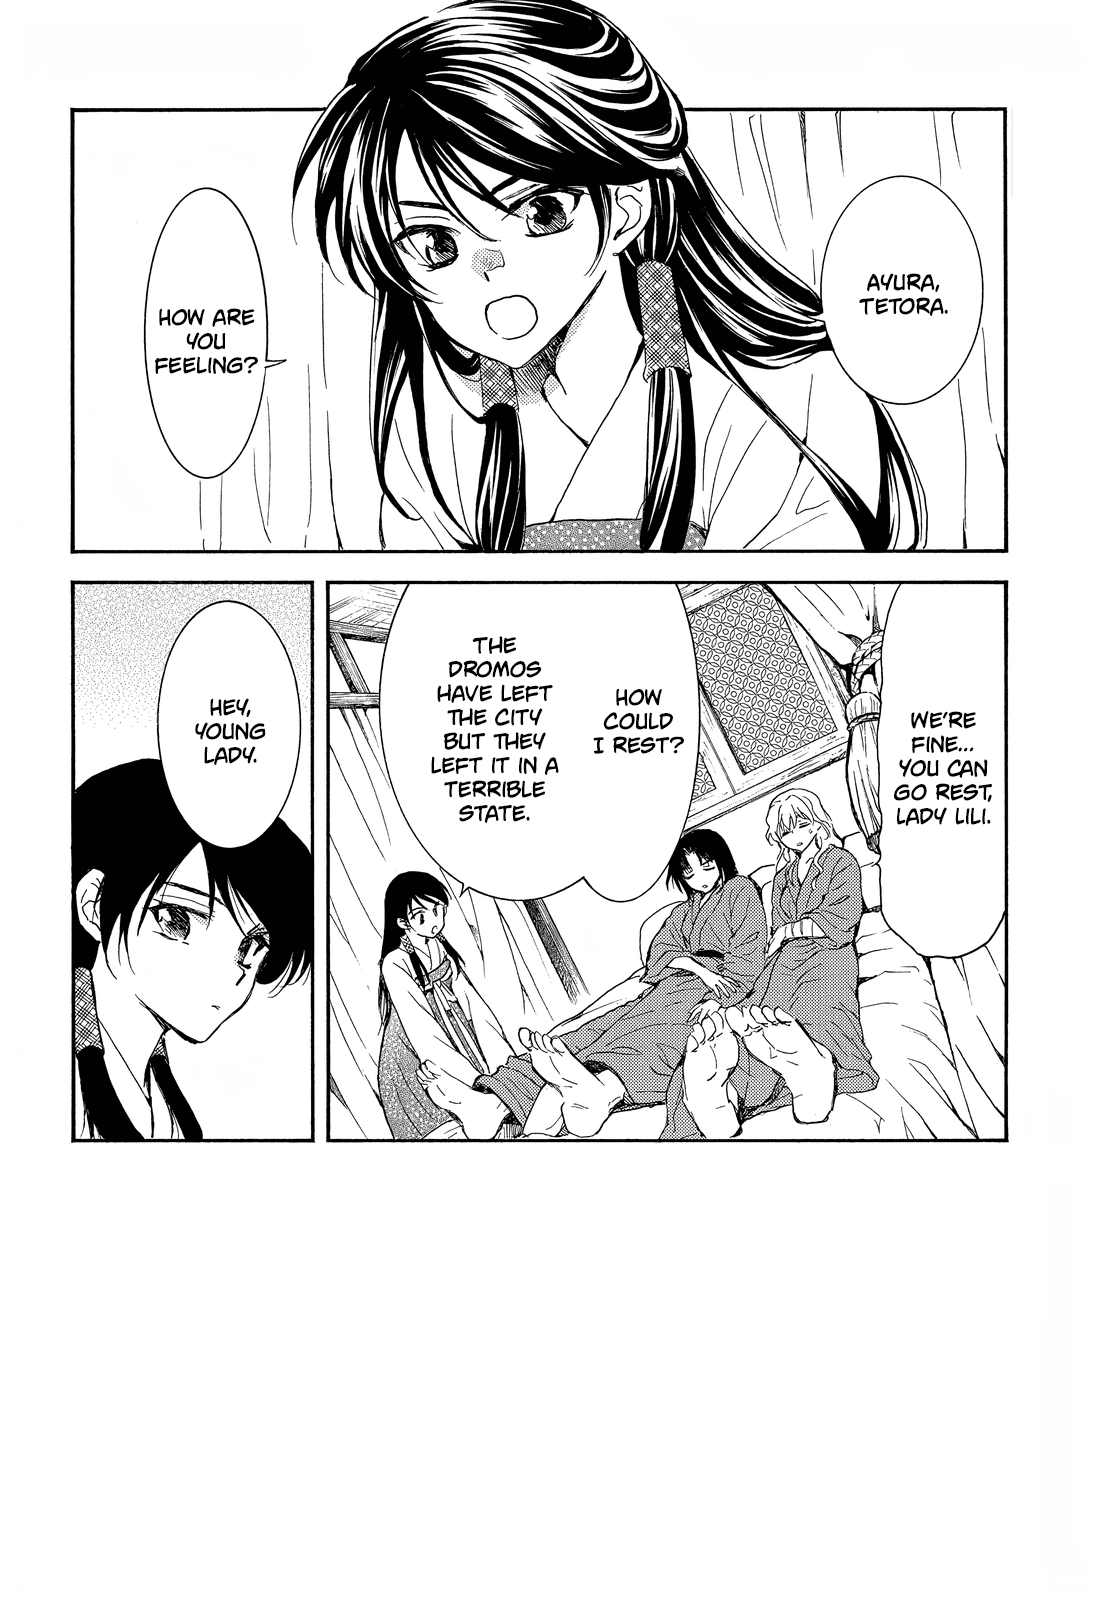 Akatsuki No Yona, Chapter 255 What was it we last talked about image 03